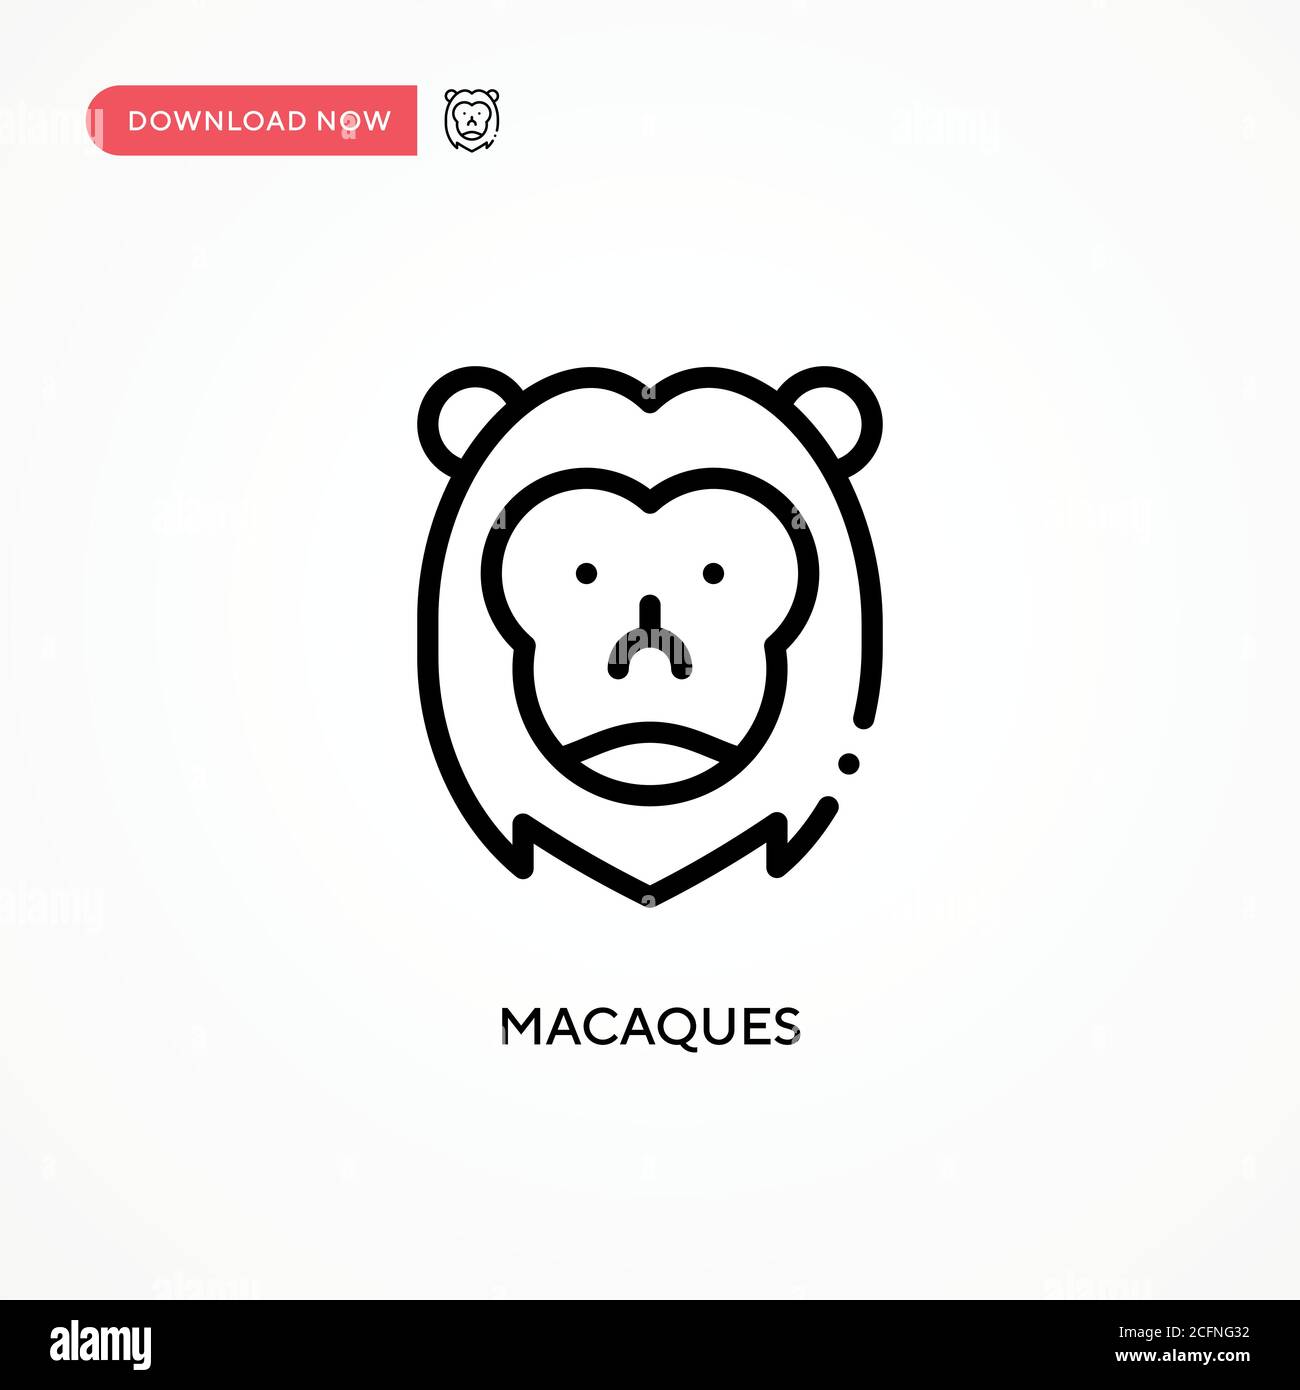 Macaques vector icon. Modern, simple flat vector illustration for web site or mobile app Stock Vector